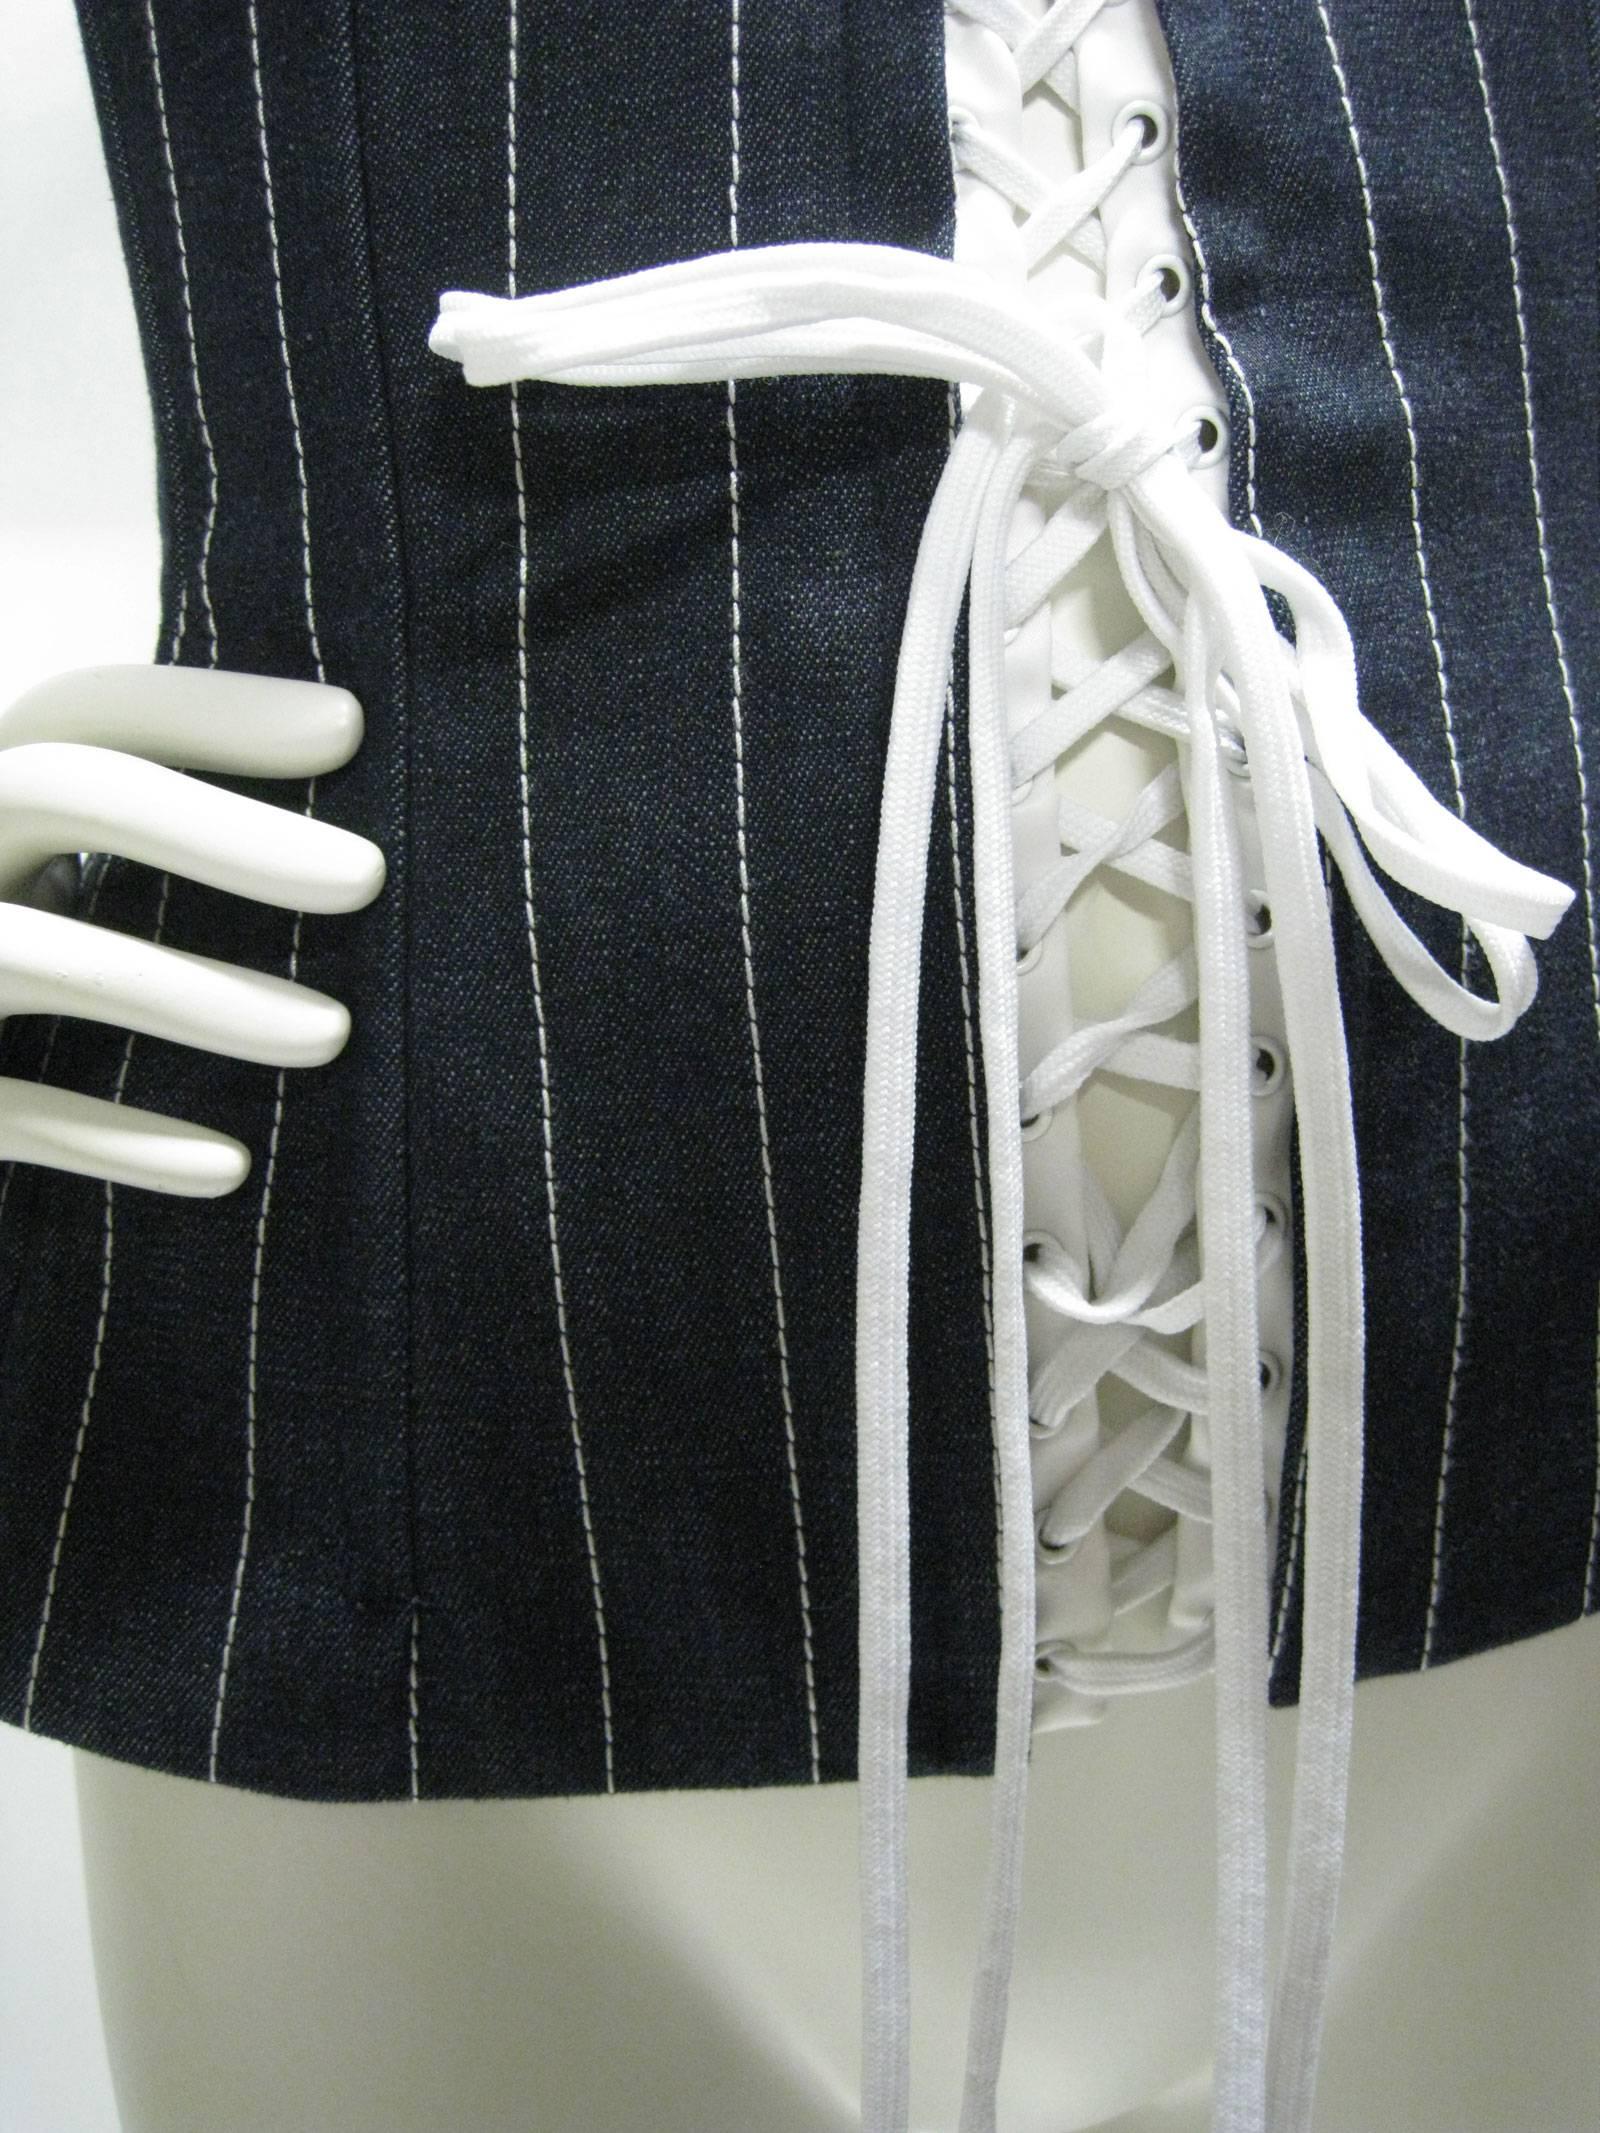 Dolce & Gabbana Denim Pin Stripe Lace Up Corset In Excellent Condition In Oakland, CA